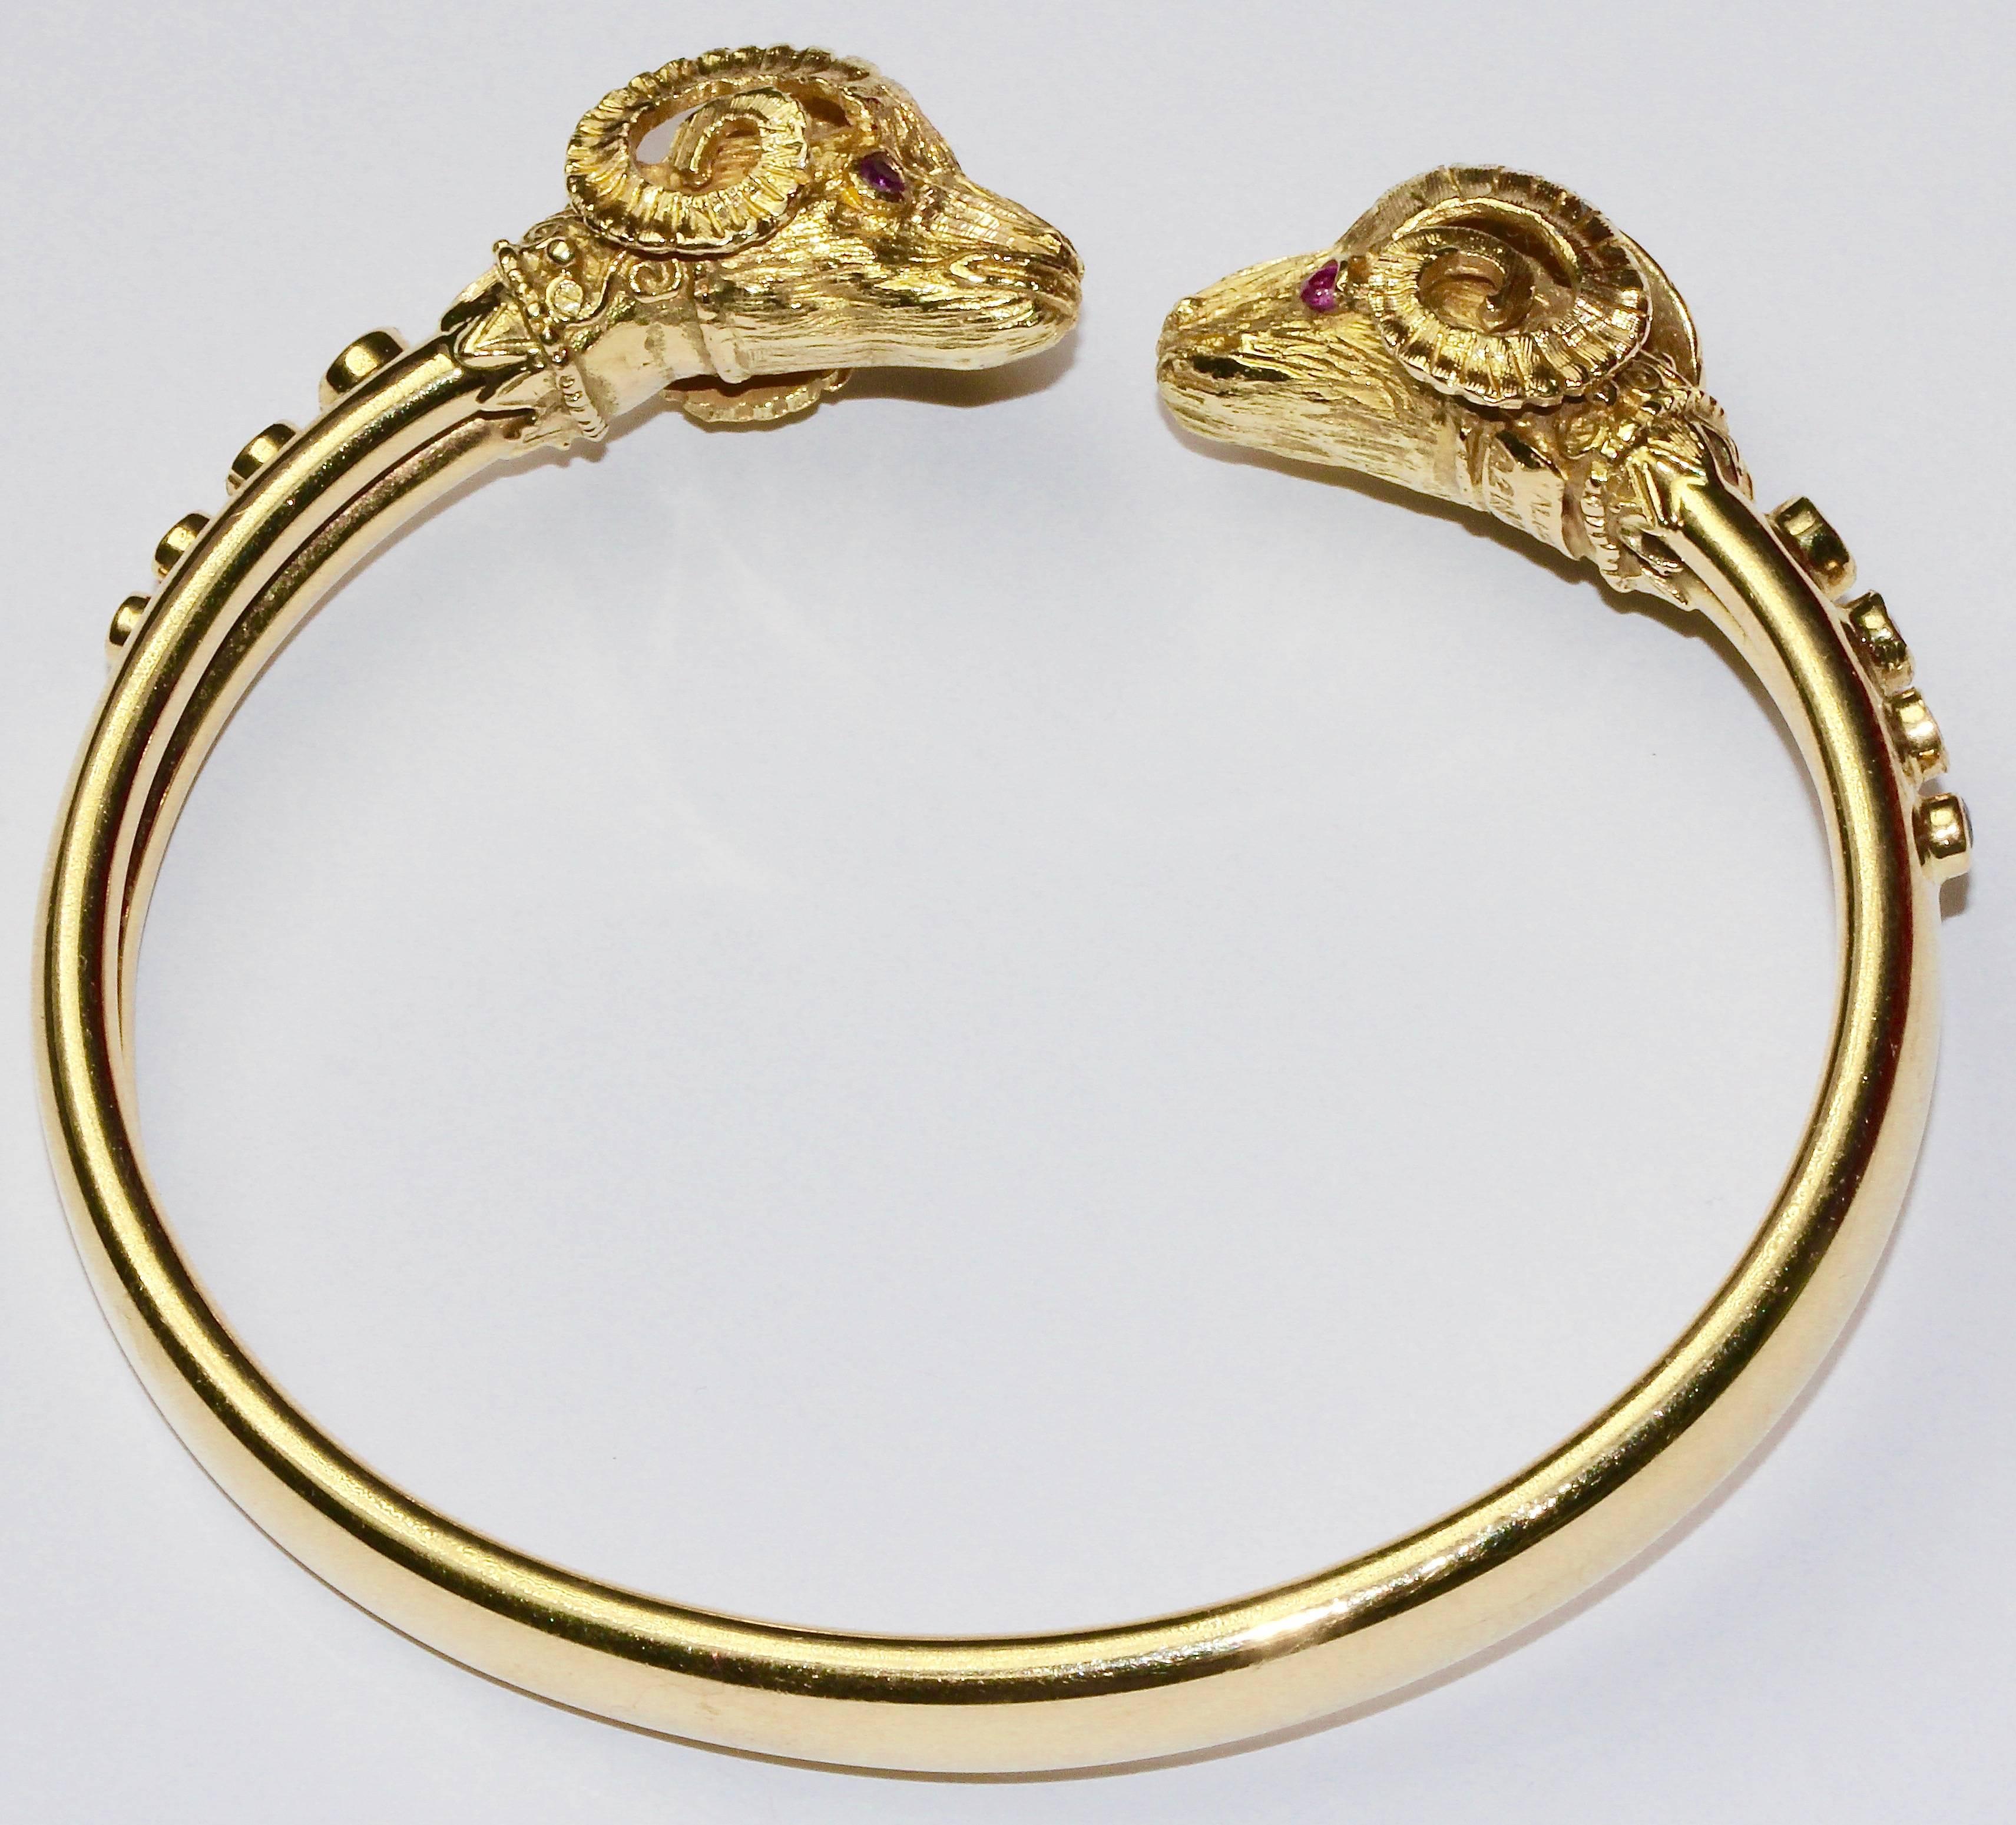 Ilias Lalaounis 18k Gold Aries Heads Bracelet with Sapphires and Rubies 4